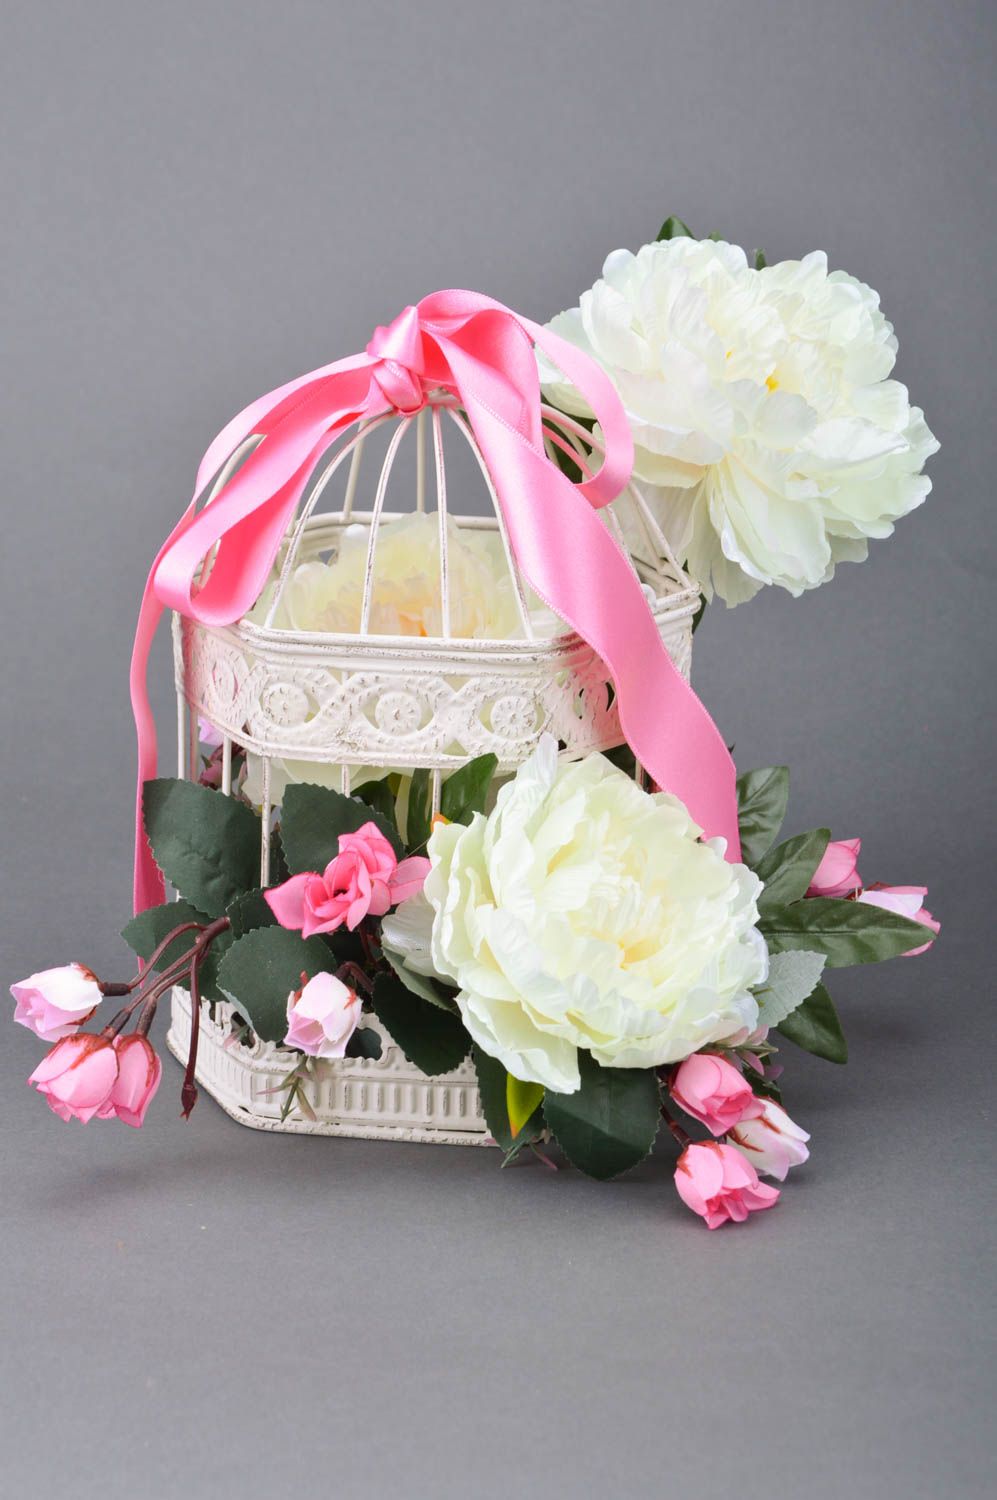 Handmade decorative cage with flowers and ribbons white peony interior ideas photo 2